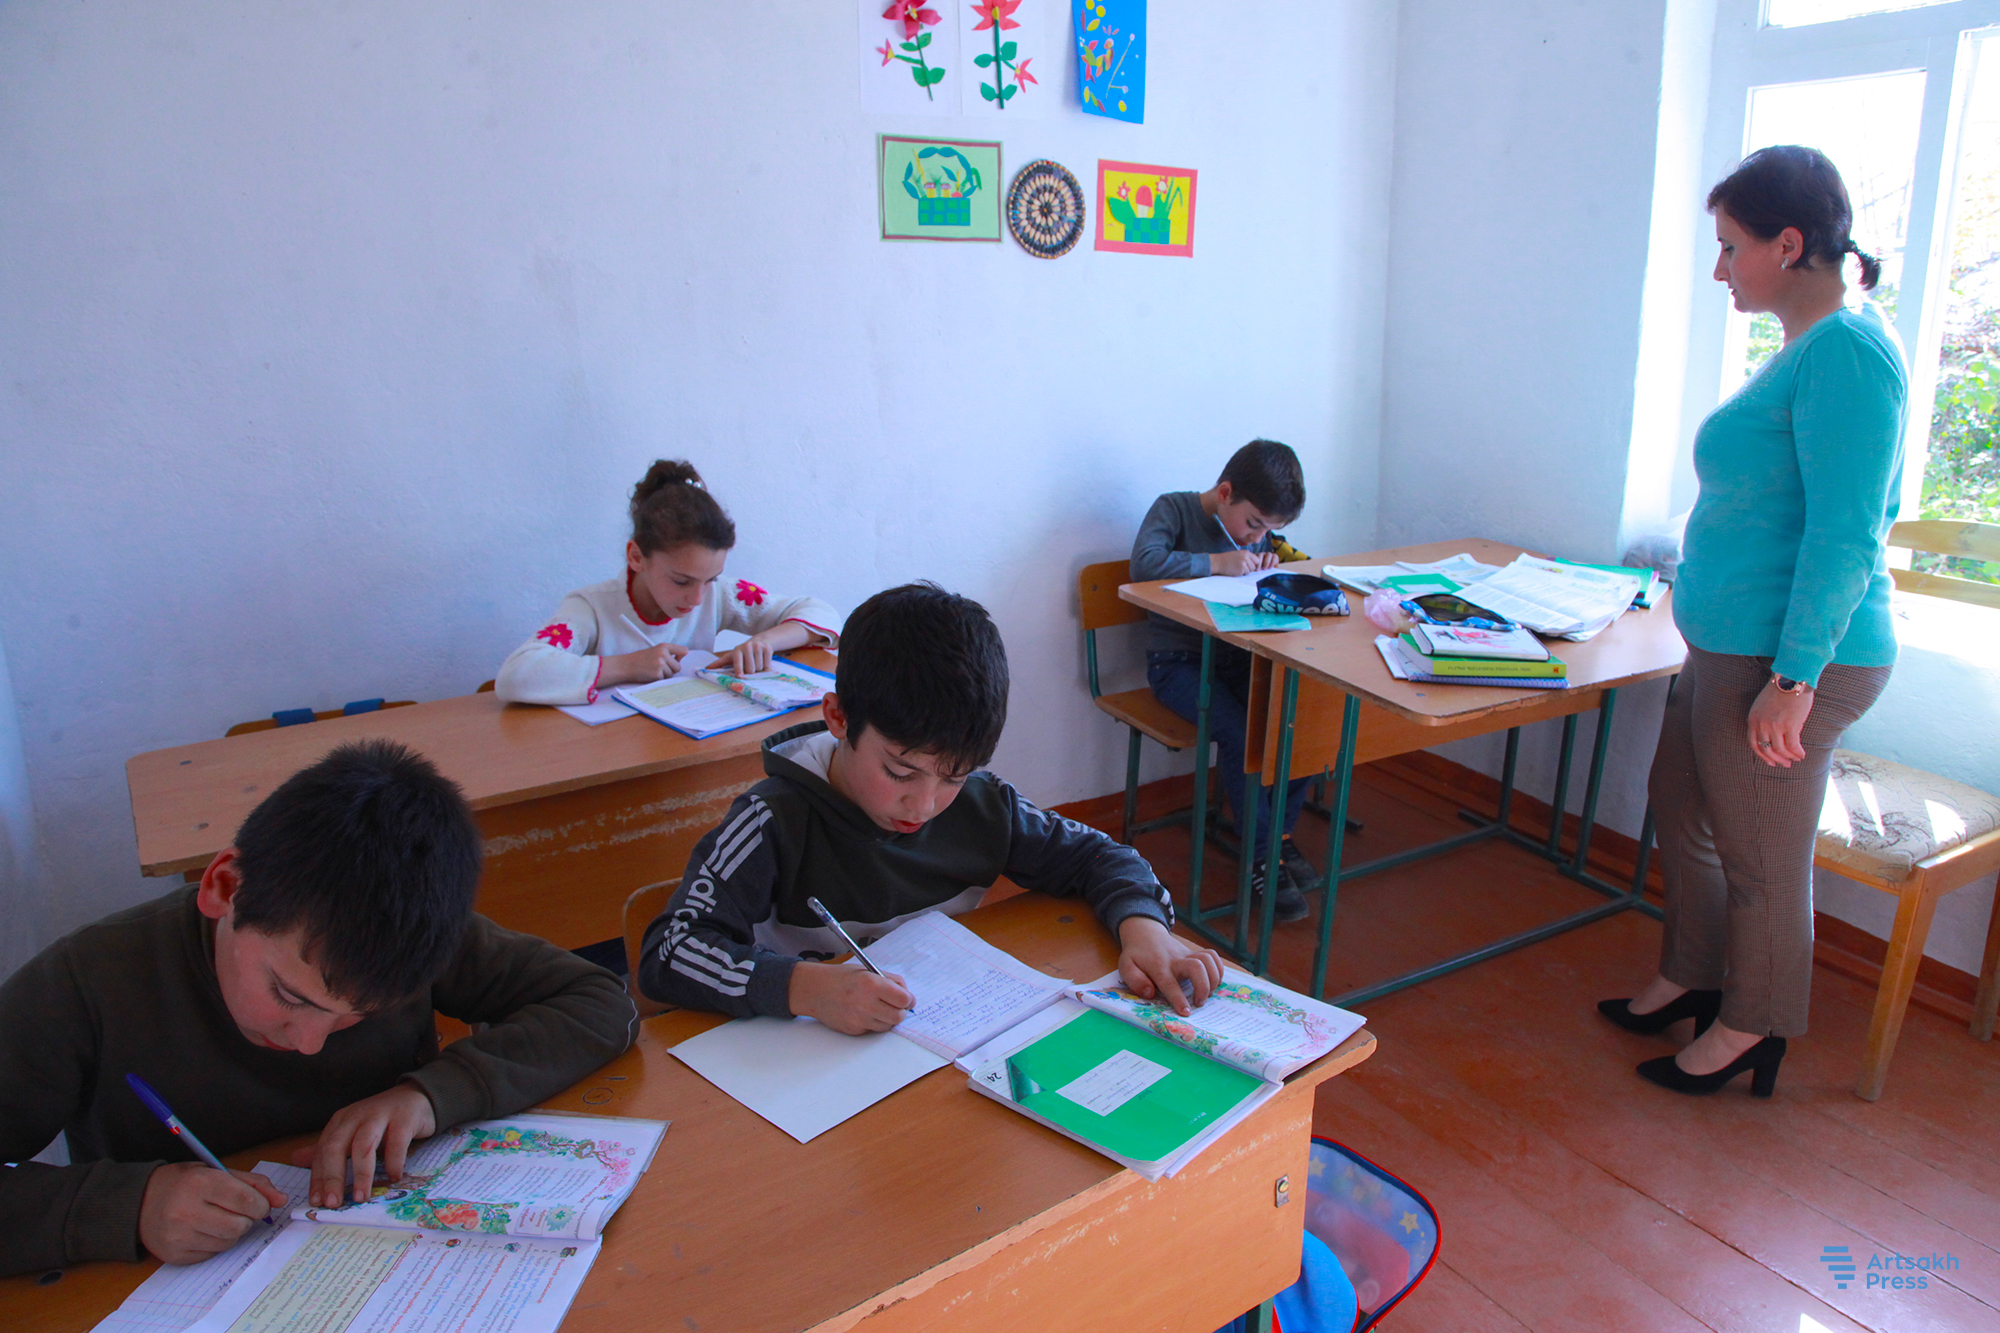 After the ceasefire, all the teachers and students returned to Shahmasur